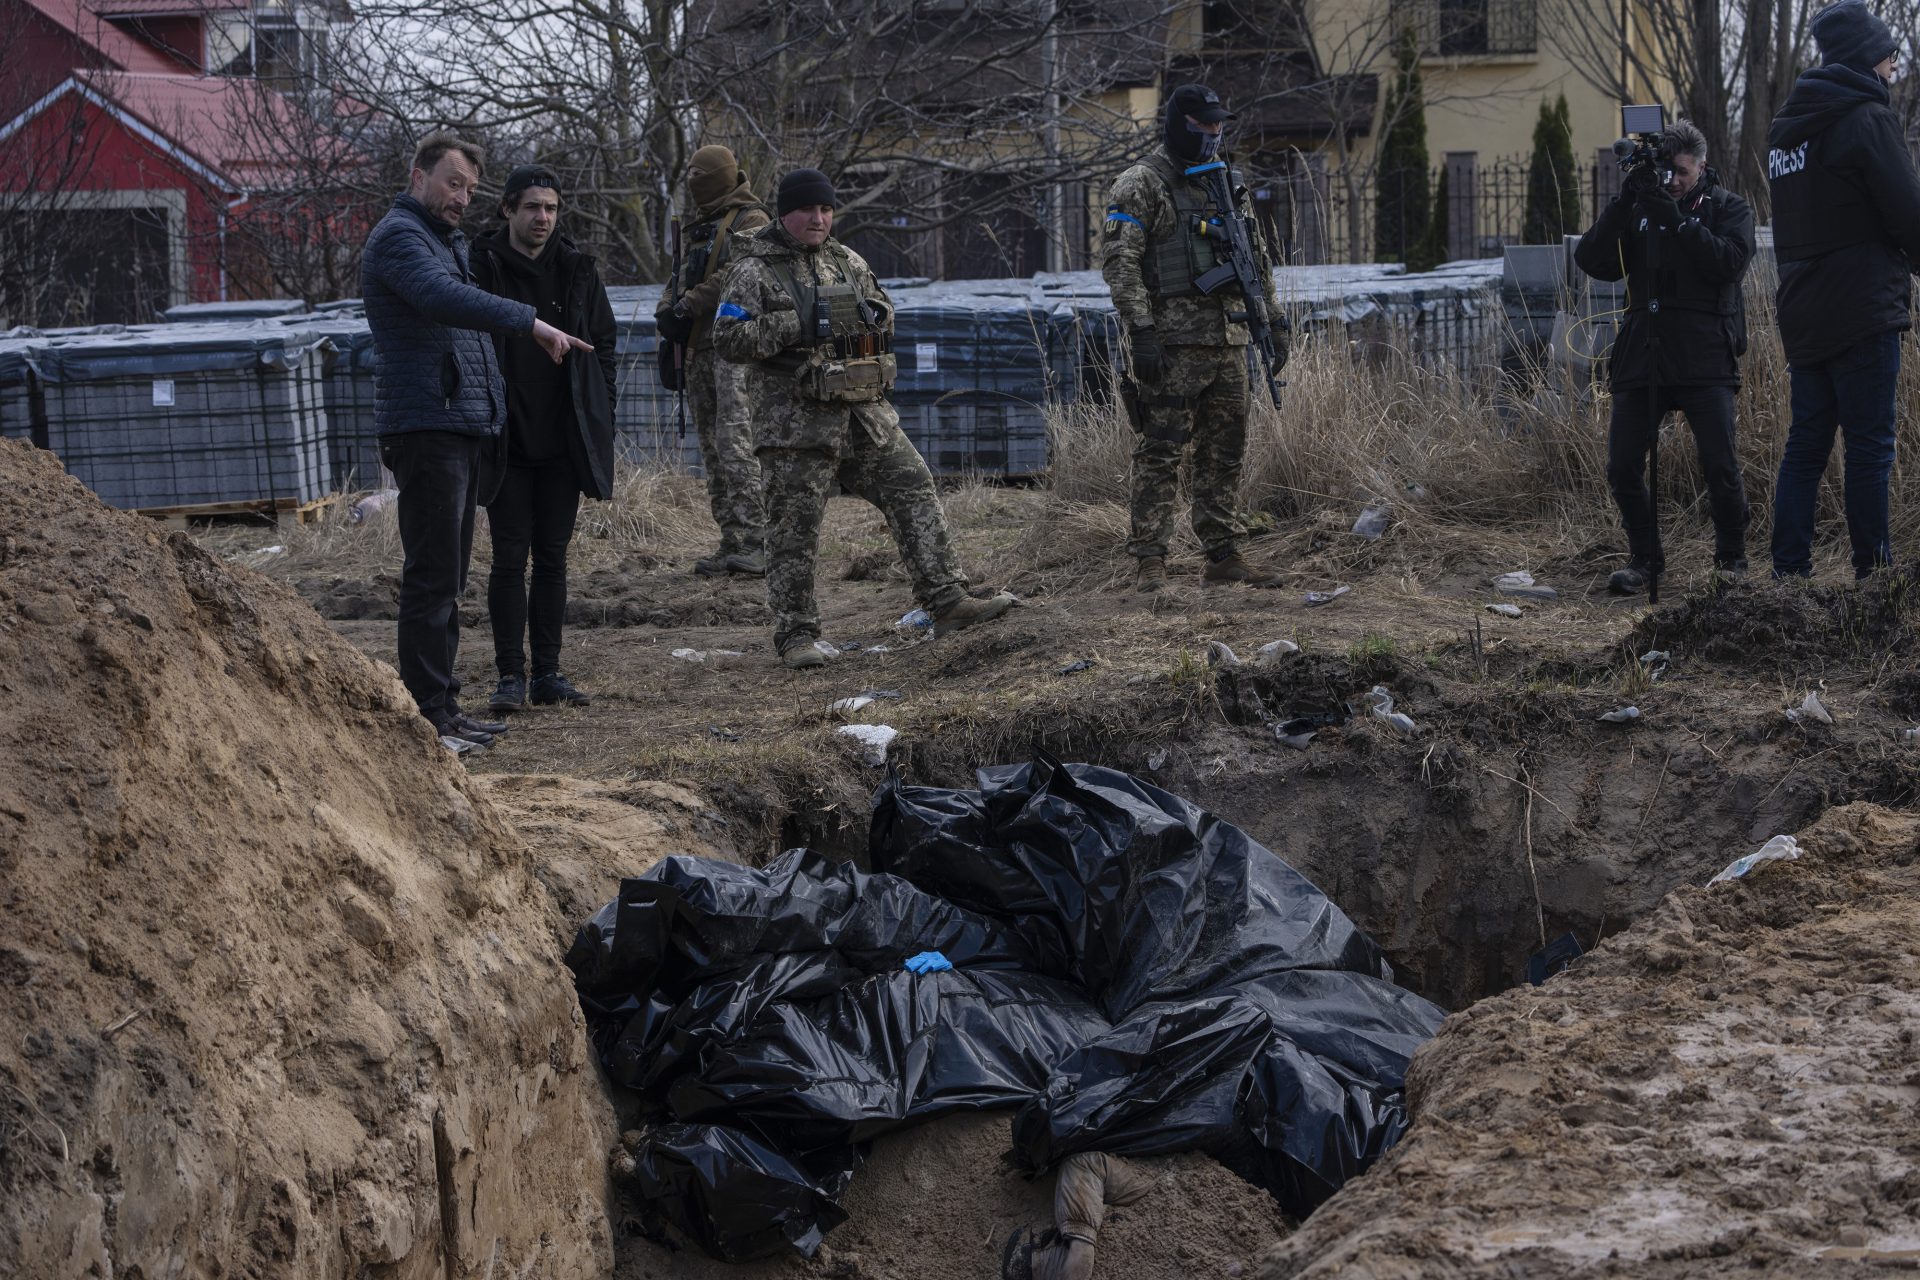 People stand next to a mass grave in Bucha, on the outskirts of Kyiv, Ukraine, April 4, 2022. AP journalists saw dozens of bodies in Bucha, many of them shot at close range, and some with their hands tied behind them